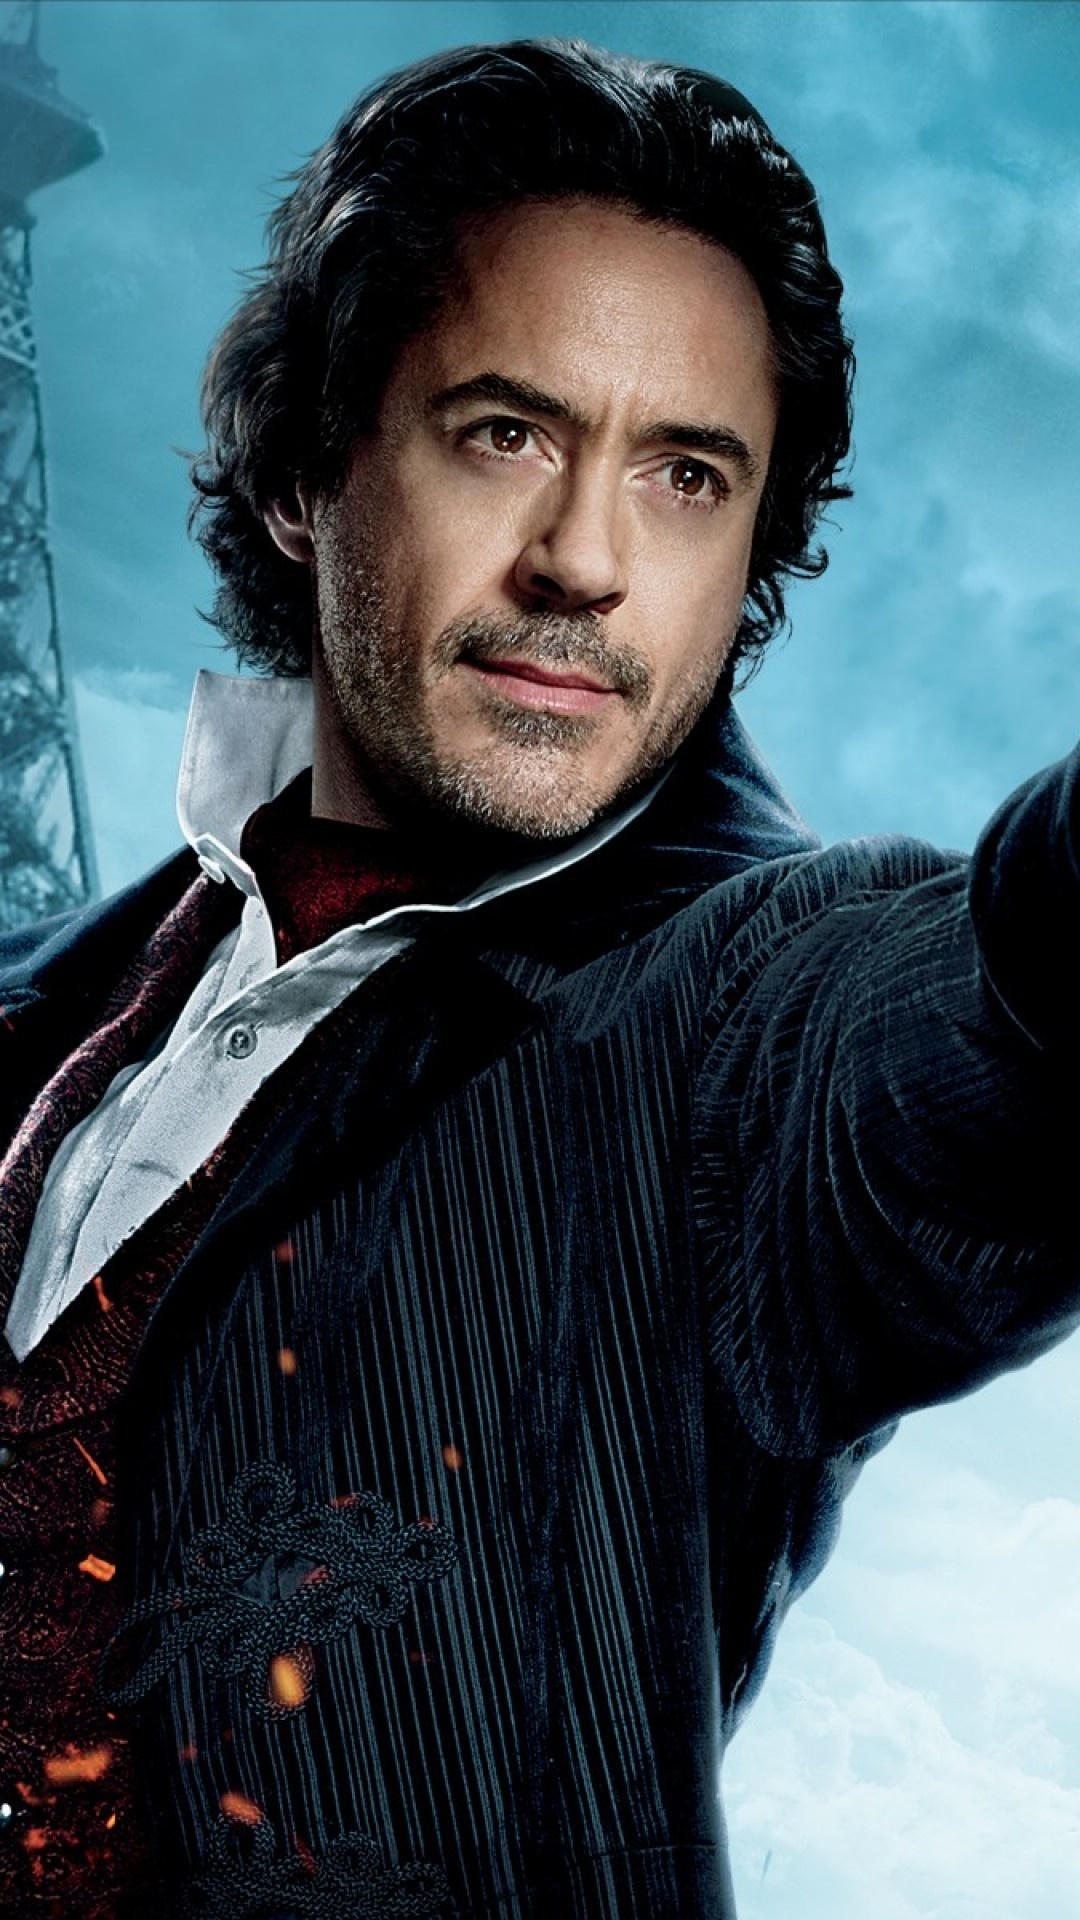 Robert Downey Jr.: The title role in Sherlock Holmes, The central character from Sir Arthur Conan Doyle’s detective series. 1080x1920 Full HD Background.